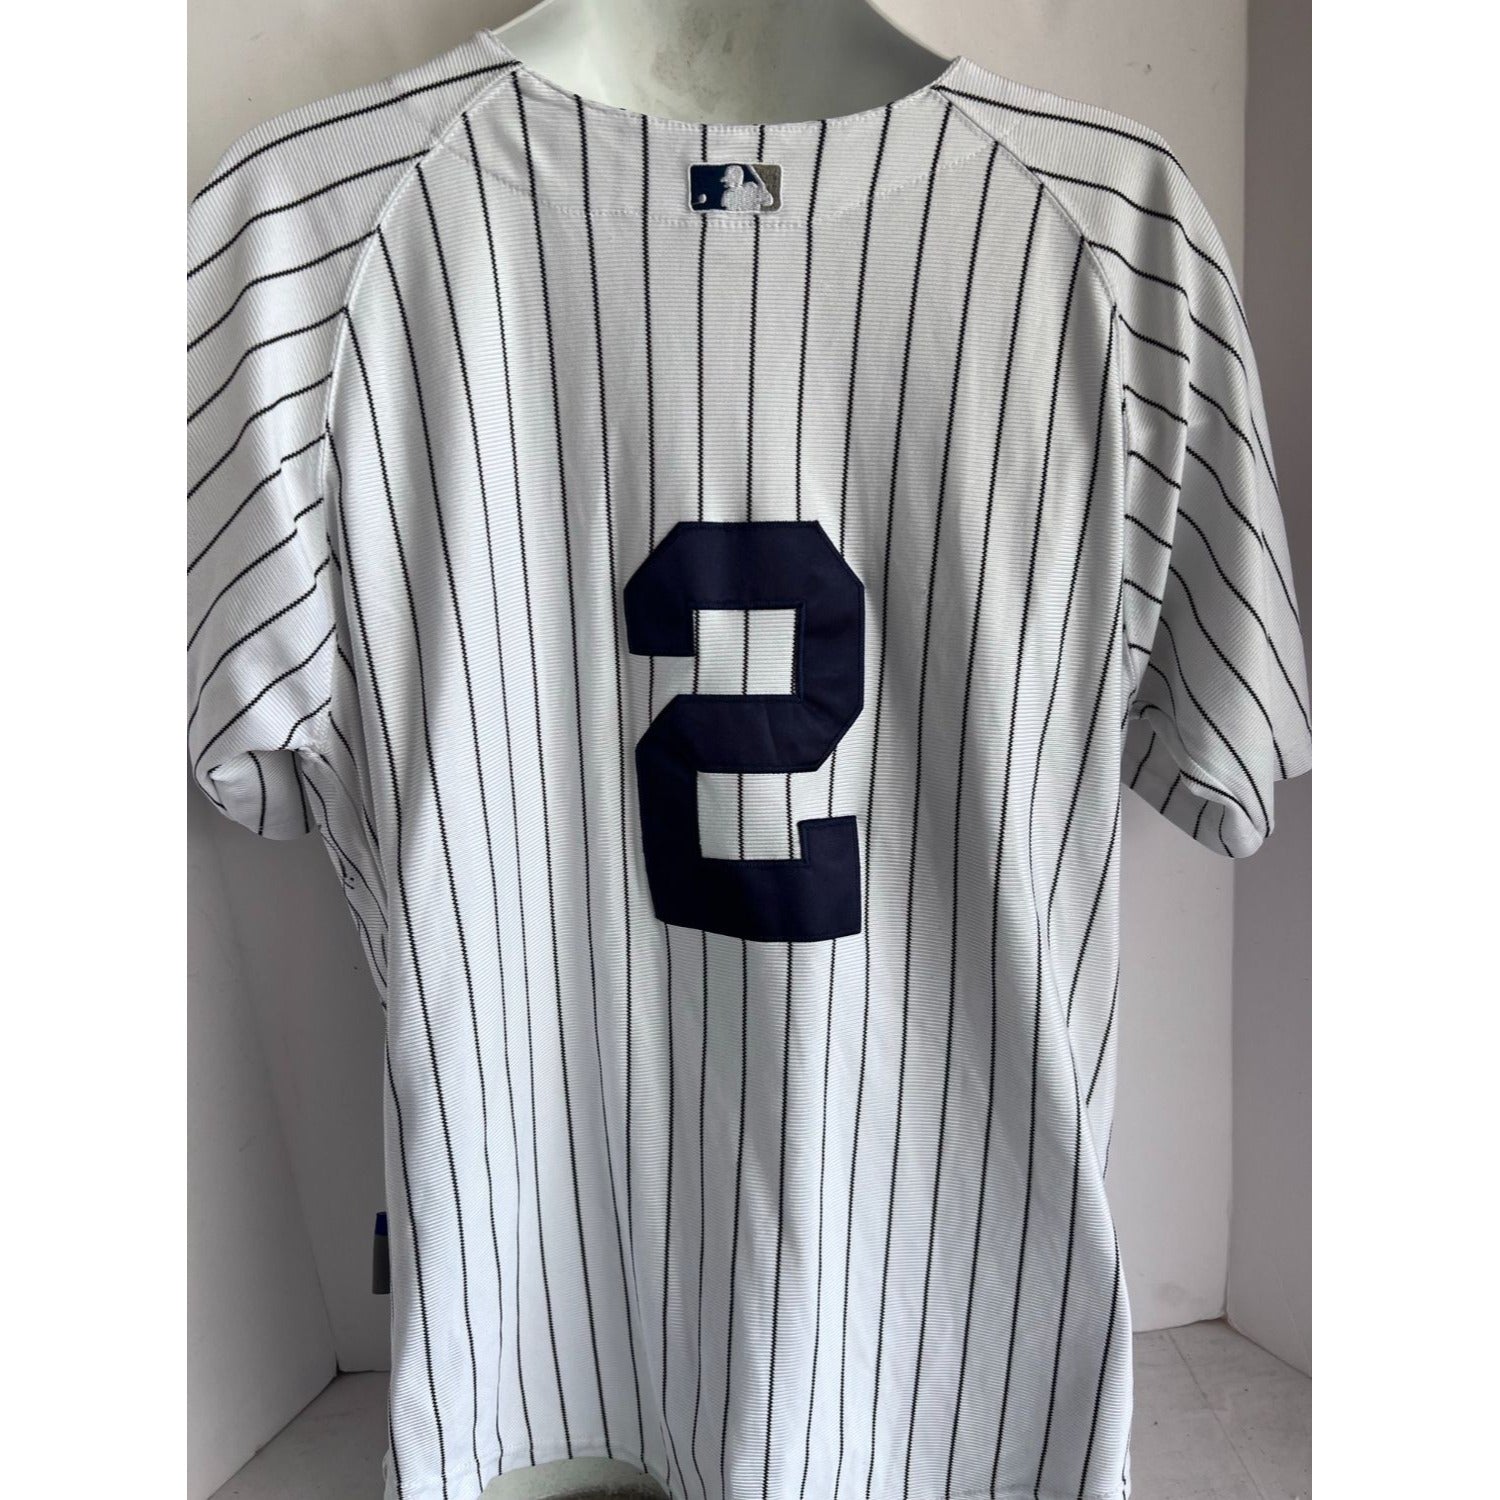 New York Yankees Derek Jeter Jersey Majestic 2009 World Series team signed with proof